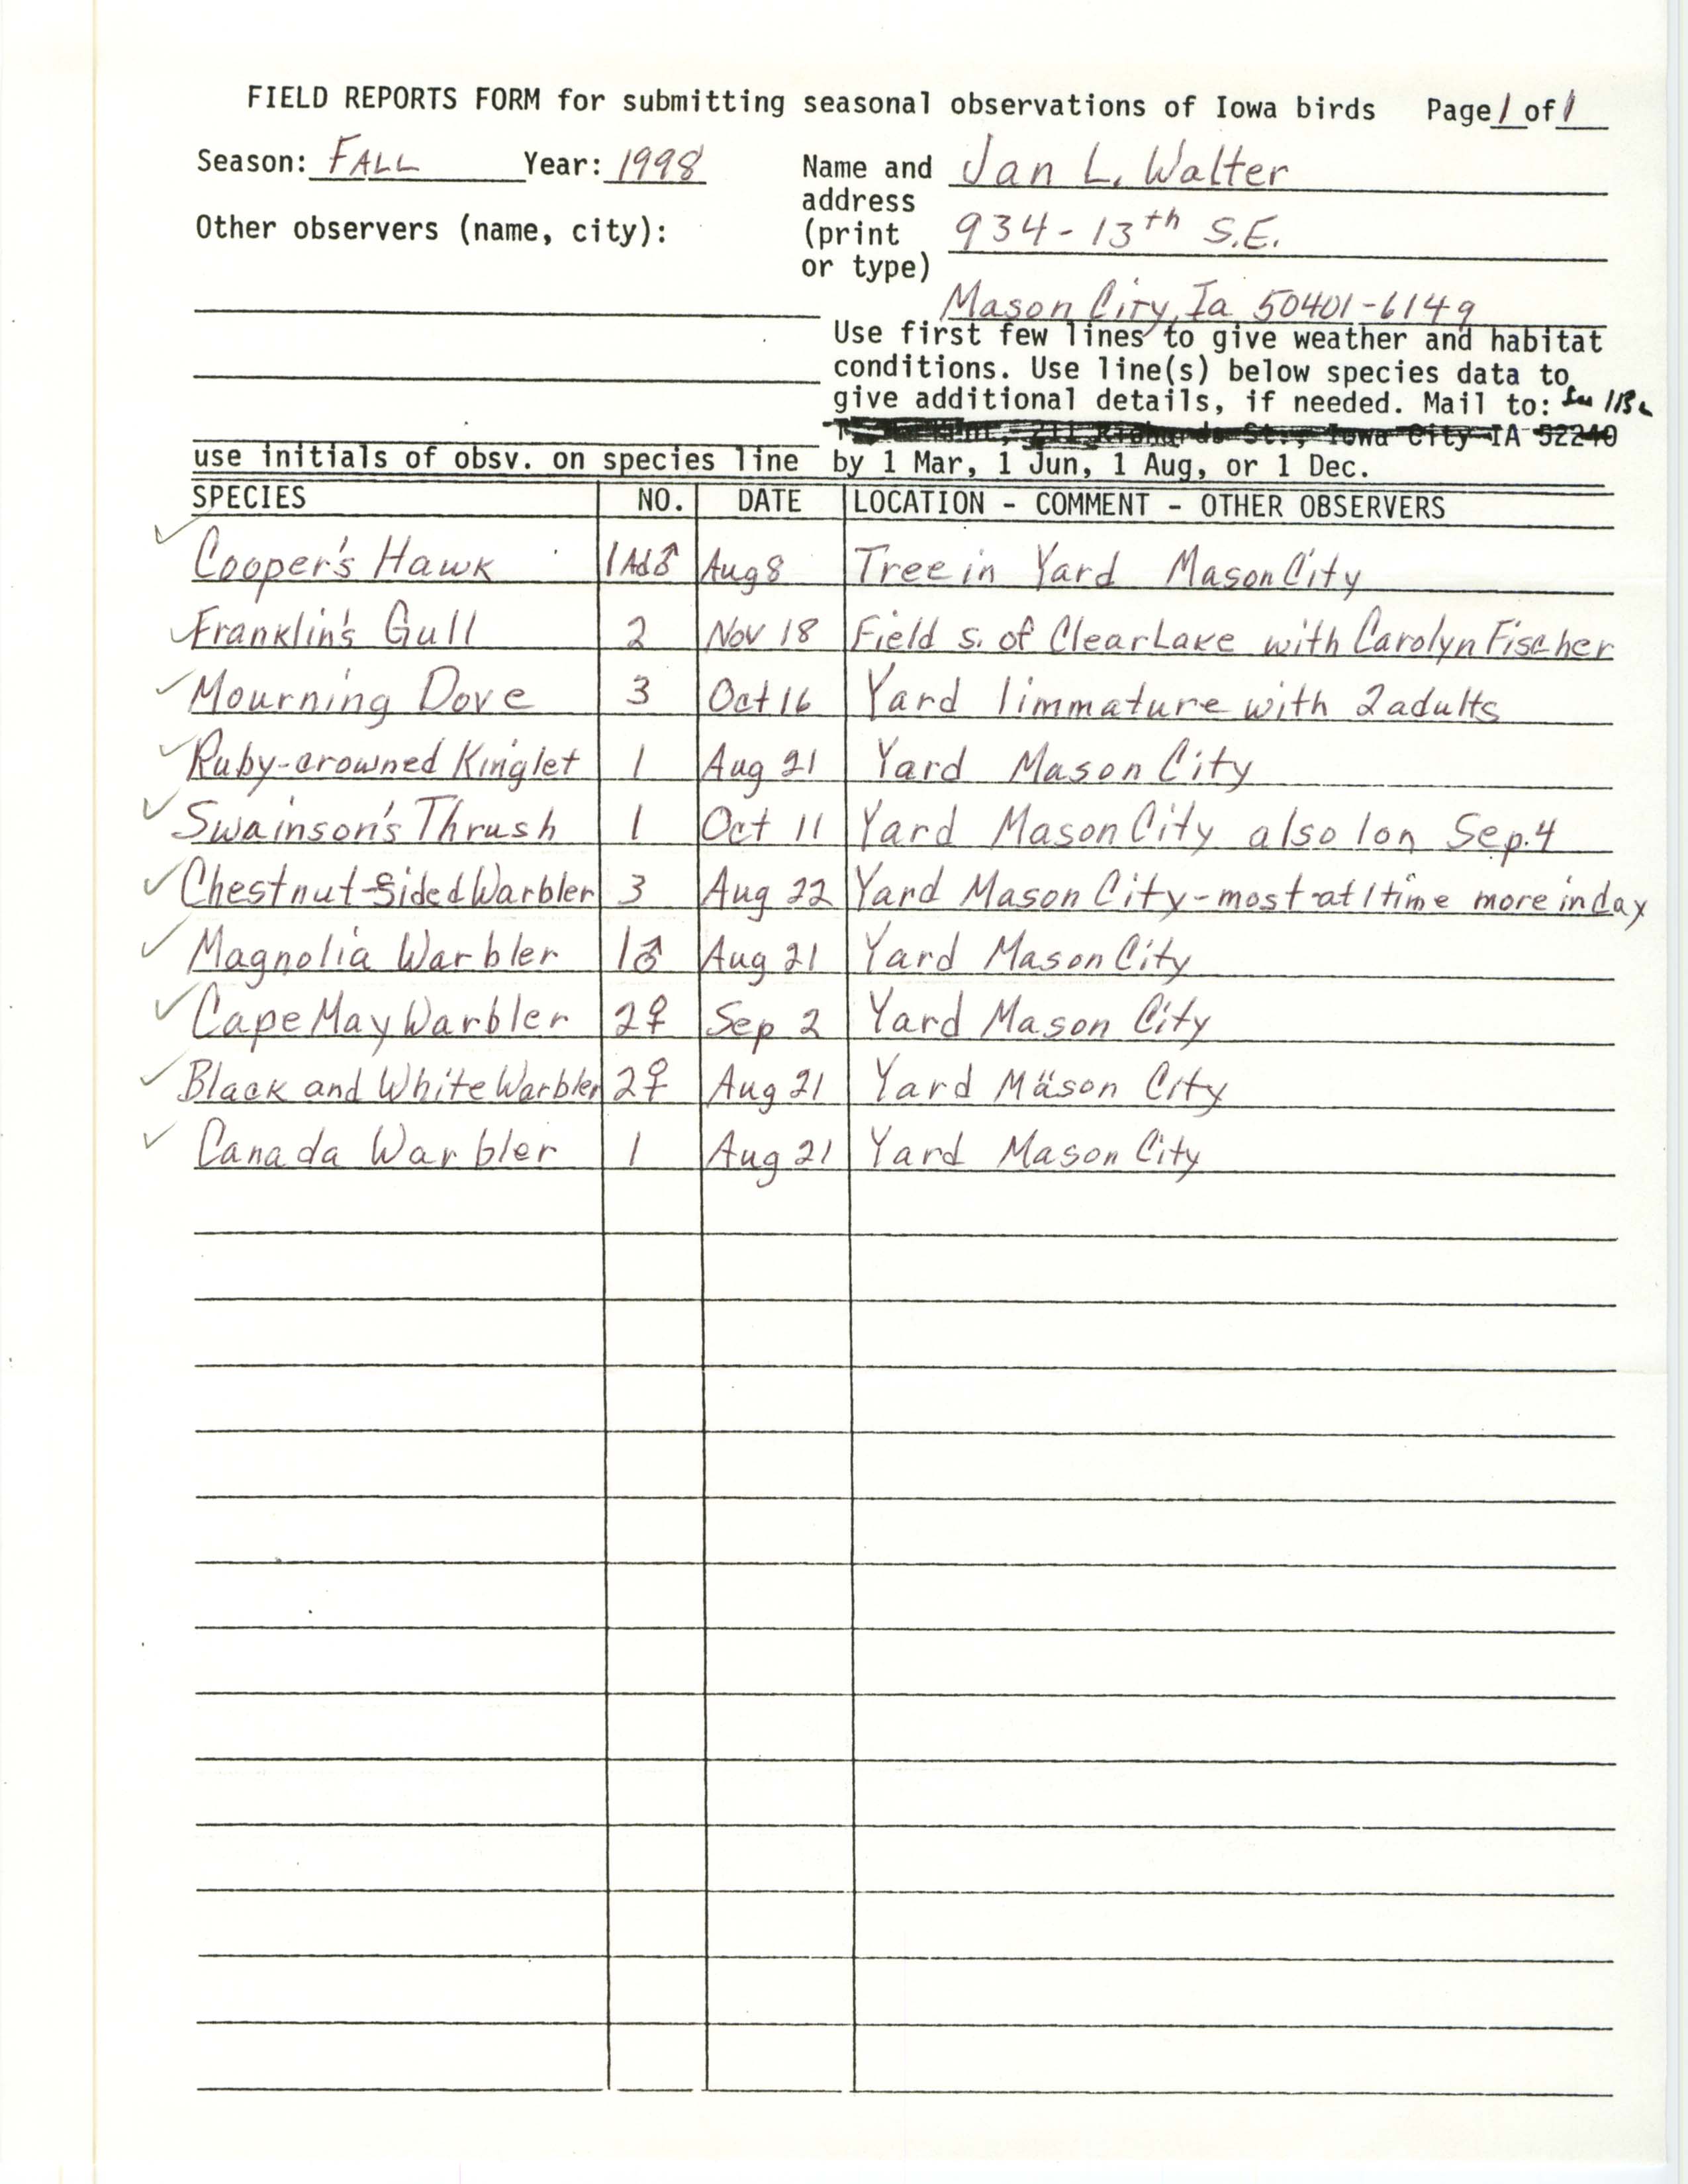 Field reports form for submitting seasonal observations of Iowa birds, Jan L. Walter, fall 1998